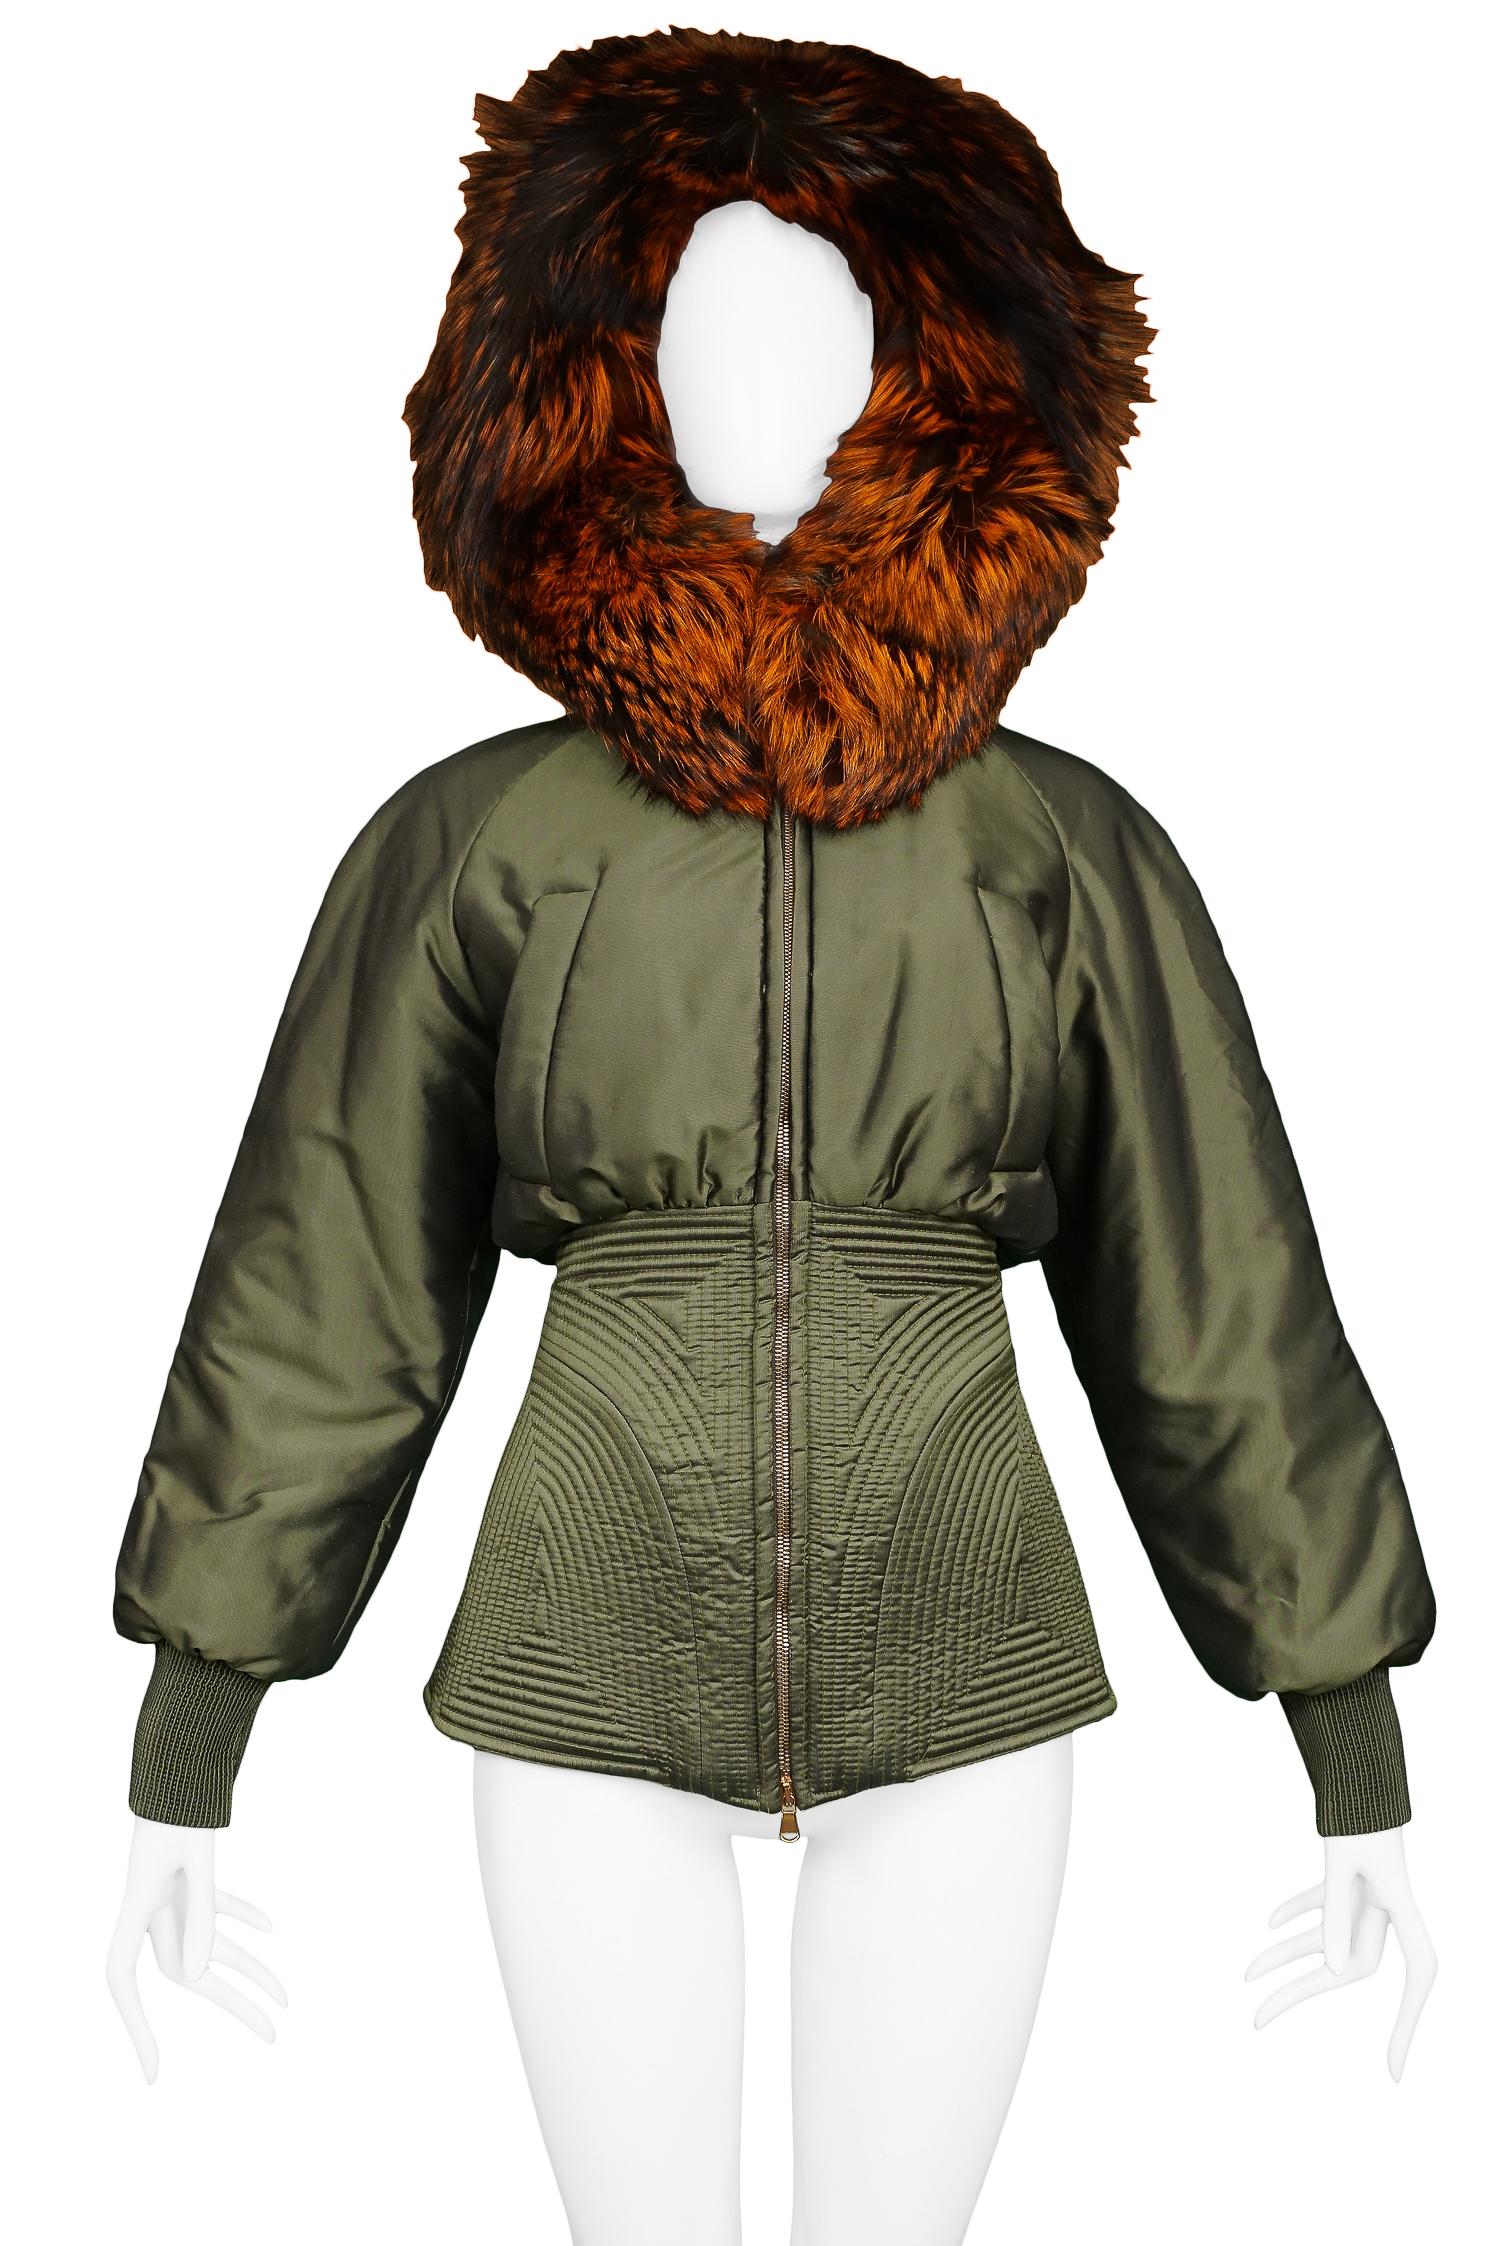 Vintage Alexander McQueen metallic military green corseted parka with auburn fox fur trim. Runway piece from the Autumn/Winter 2007 Collection. 

Excellent Vintage Condition.

Size 38

Measurements:
Bust 38